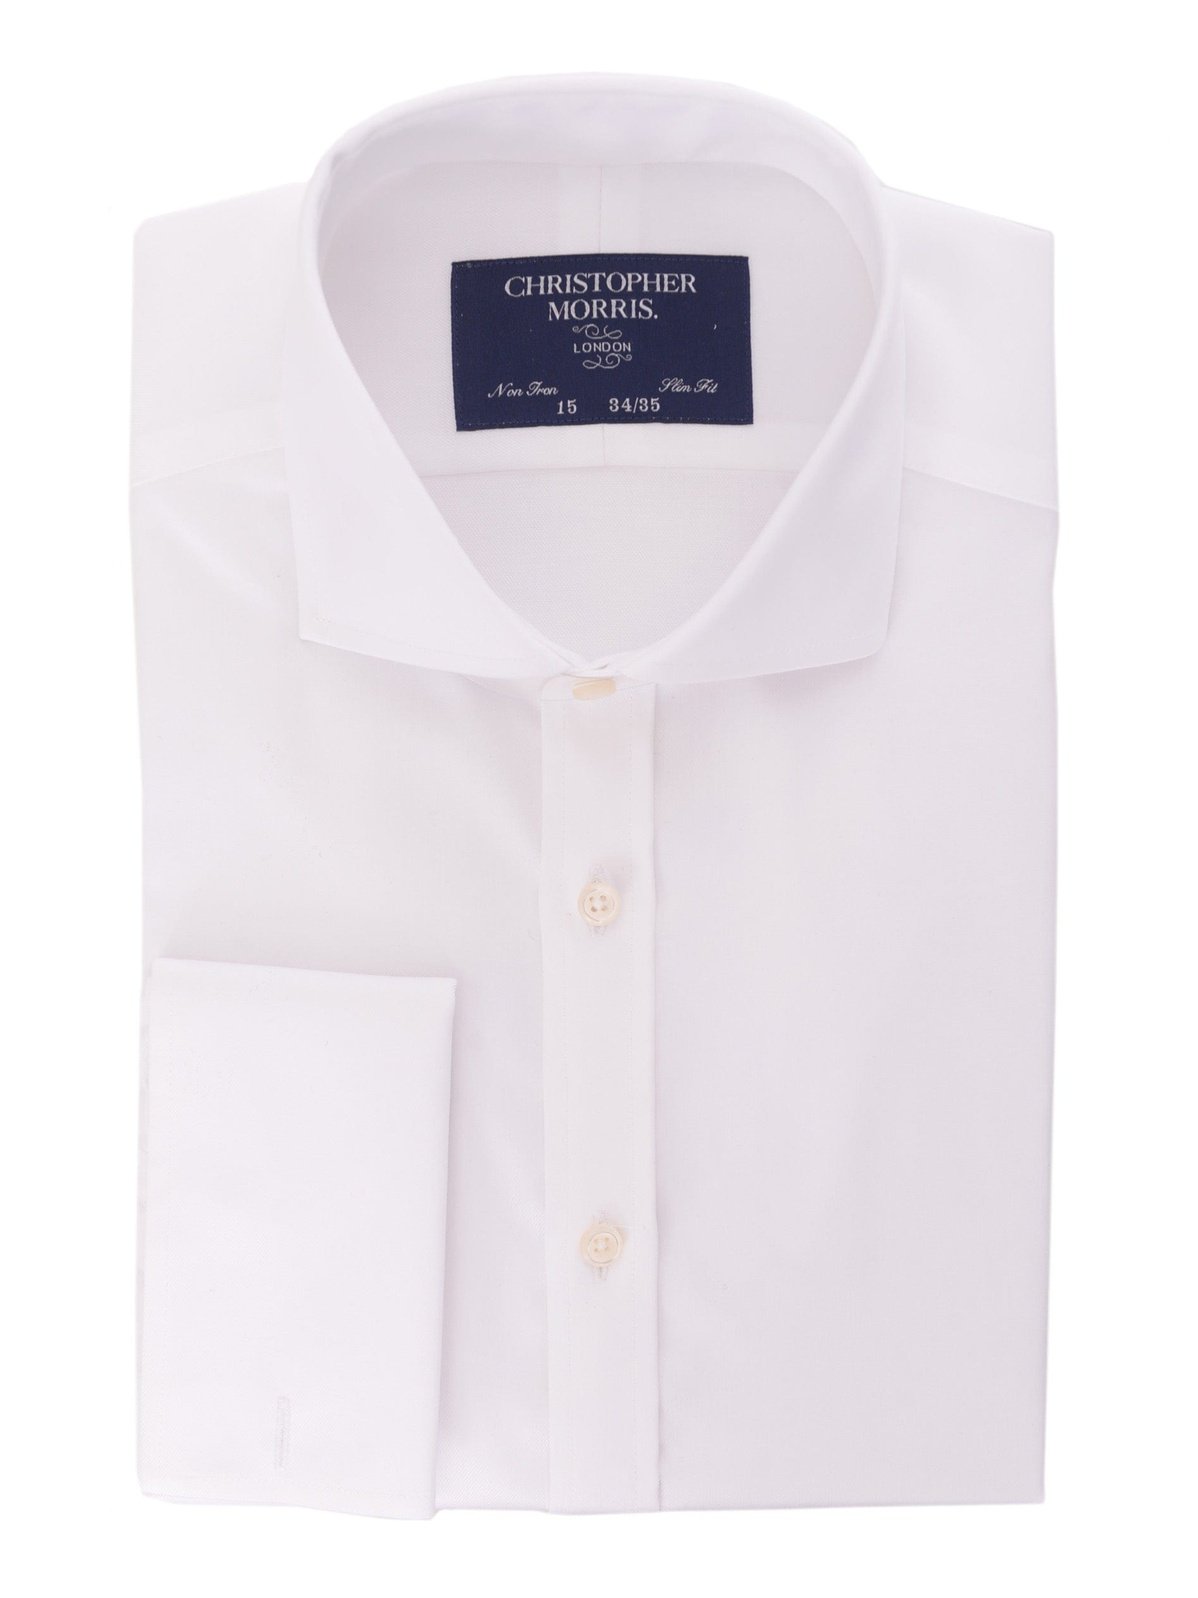 Christopher Morris Bestselling Items Christopher Morris Men's 100% Cotton Non-Iron White Slim Fit French Cuff Dress Shirt